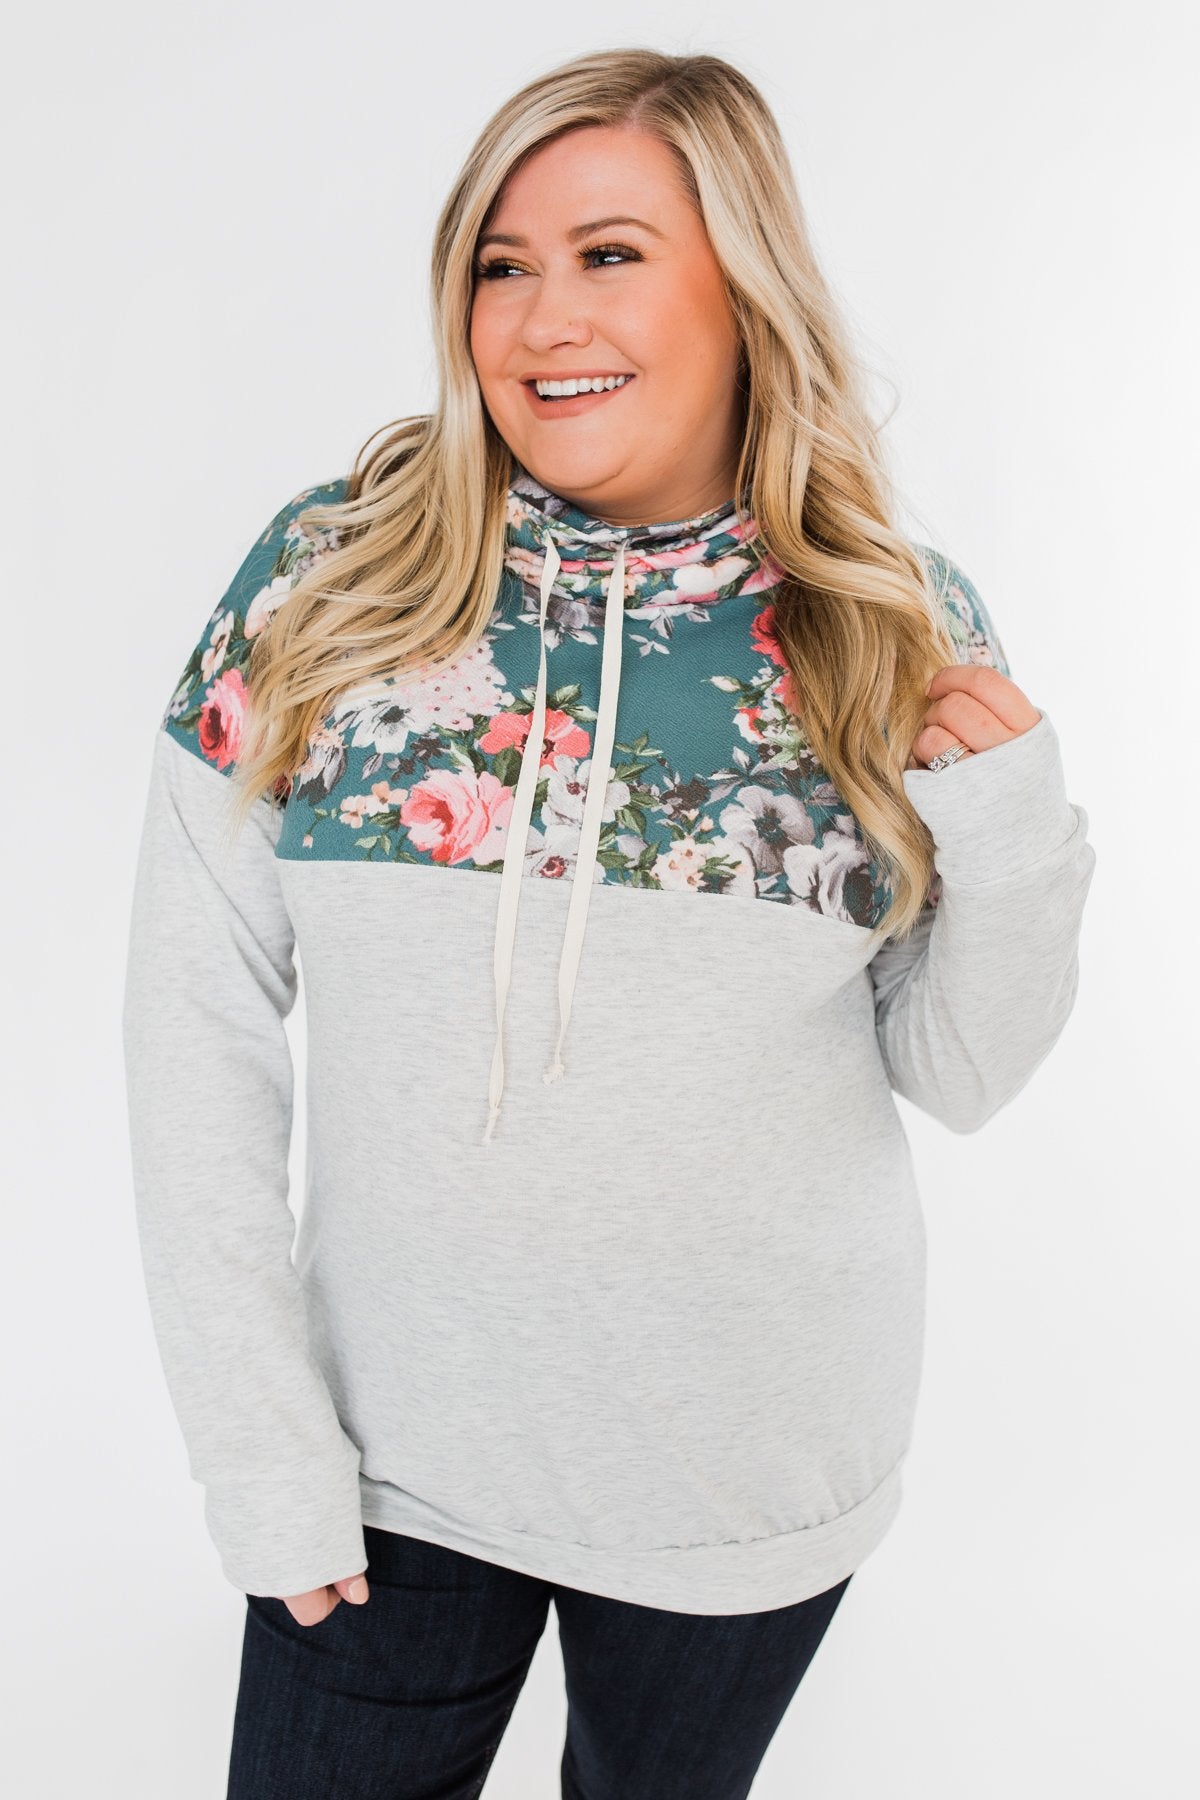 Most Beautiful Of Them All Cowl Neck Top- Heather Grey & Teal – The ...